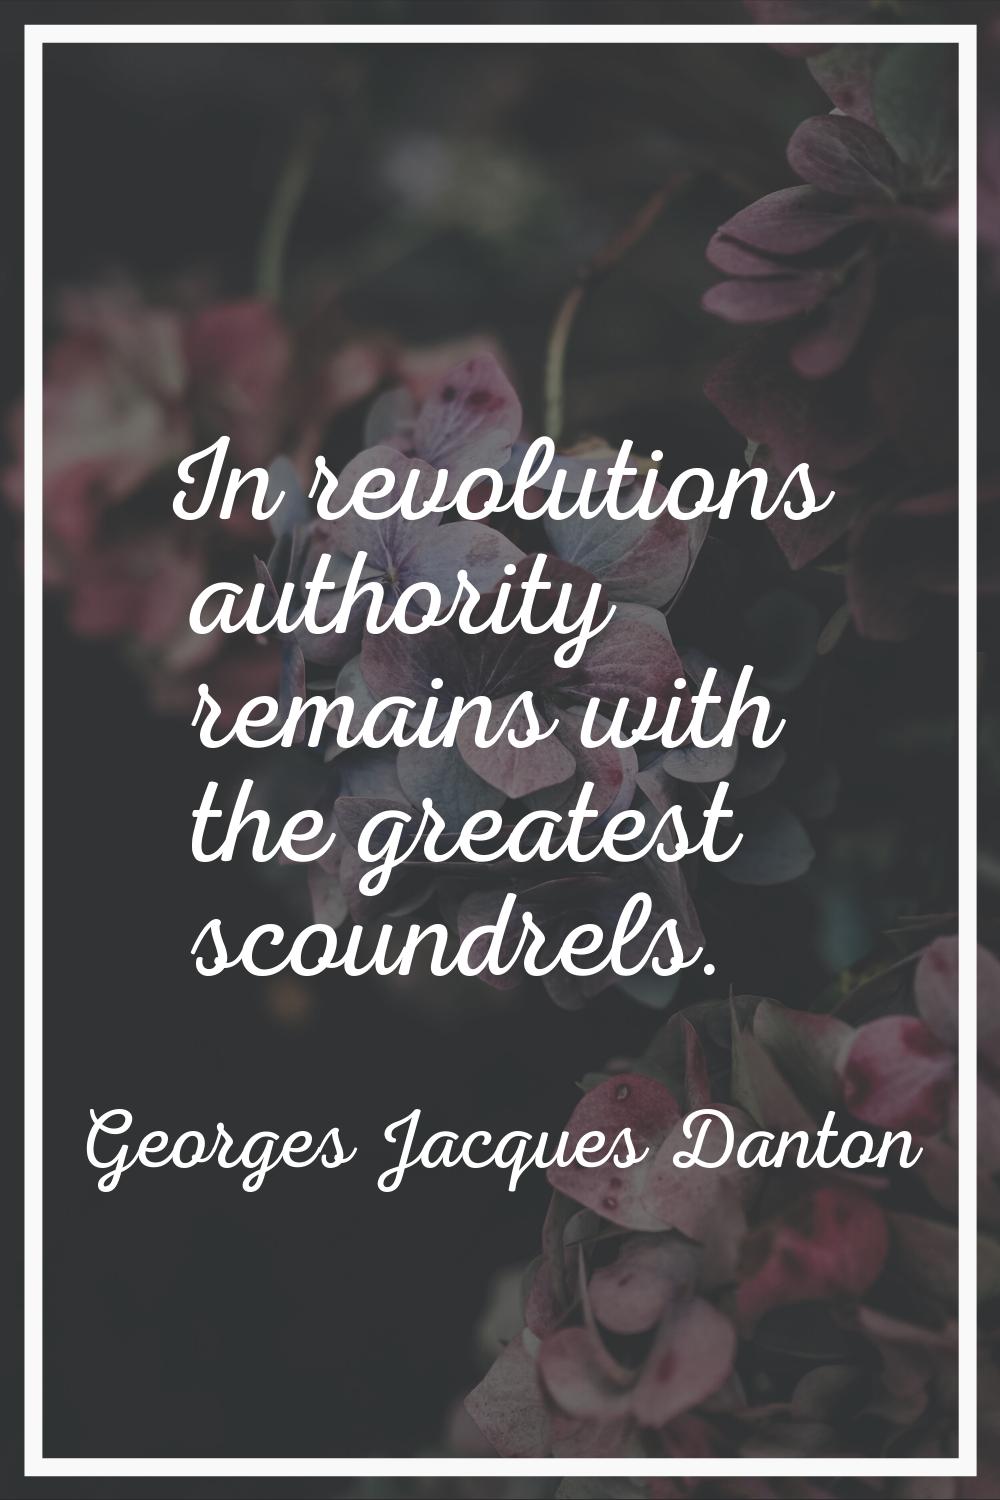 In revolutions authority remains with the greatest scoundrels.